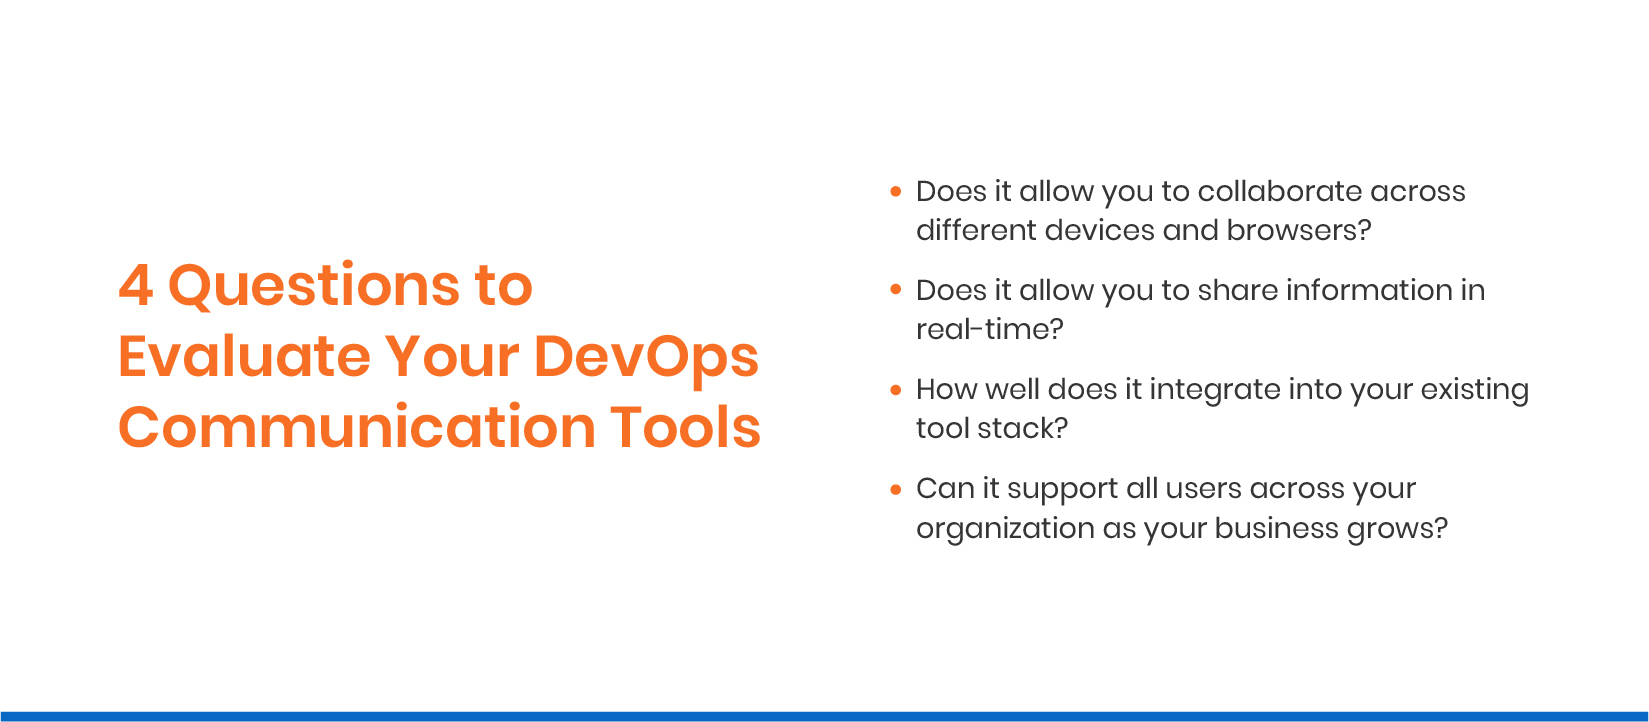 4 Questions to Evaluate Your DevOps Communication Tools